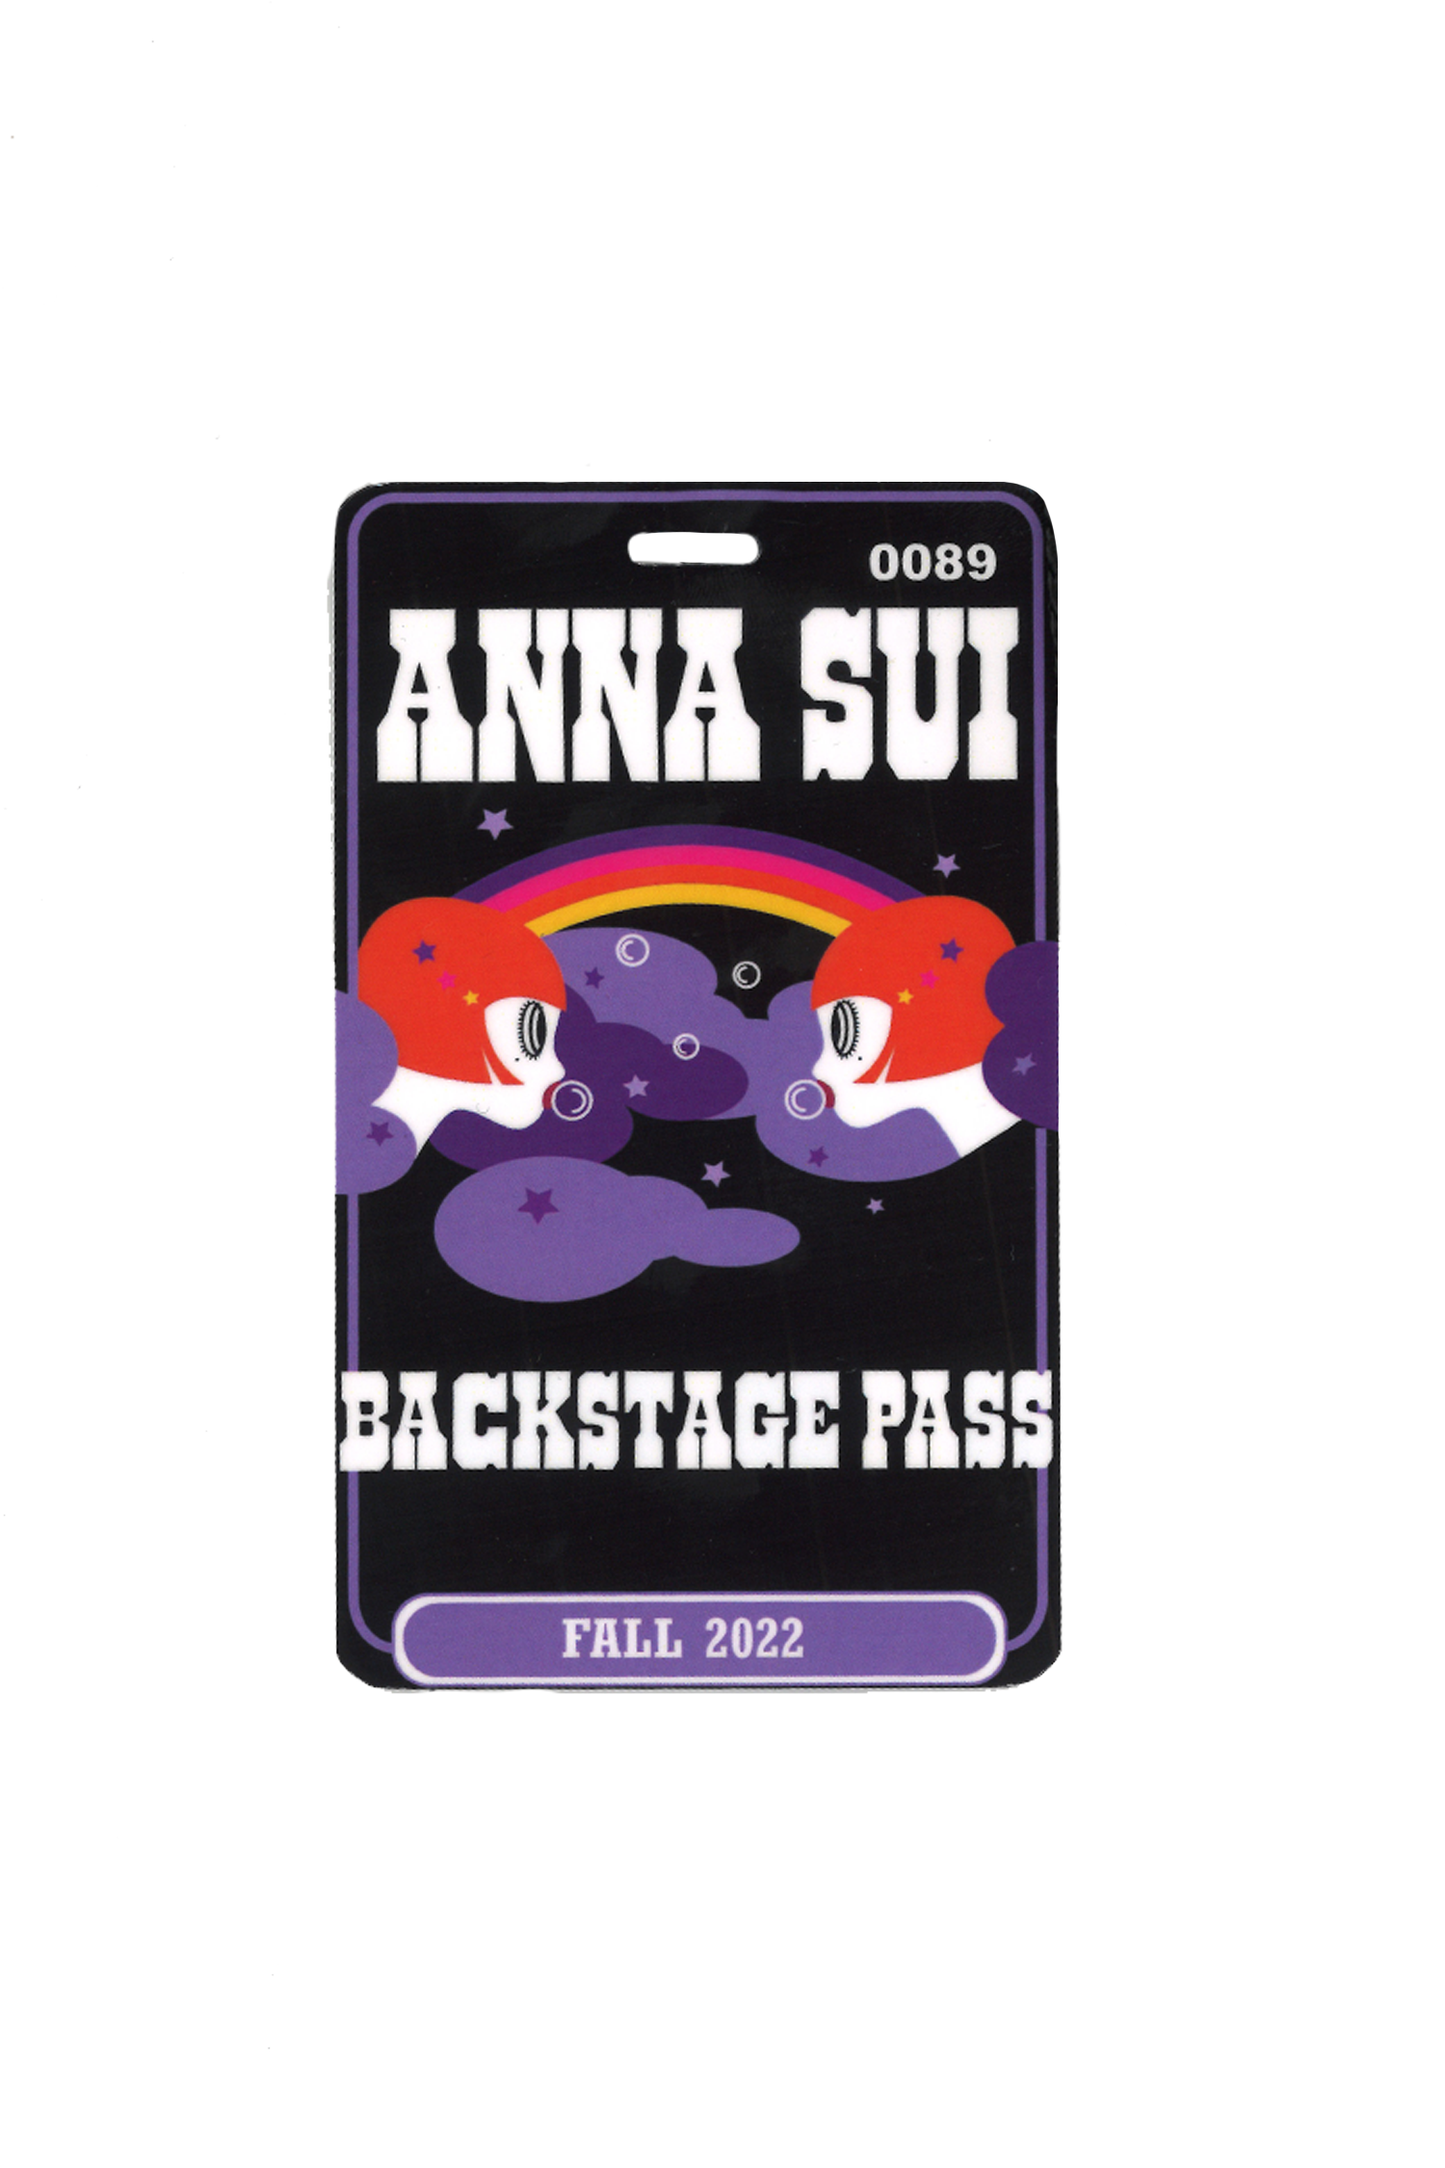 Anna Sui Backstage Pass, black rectangle with Anna Sui on top, bubblegum girls, fall 2022